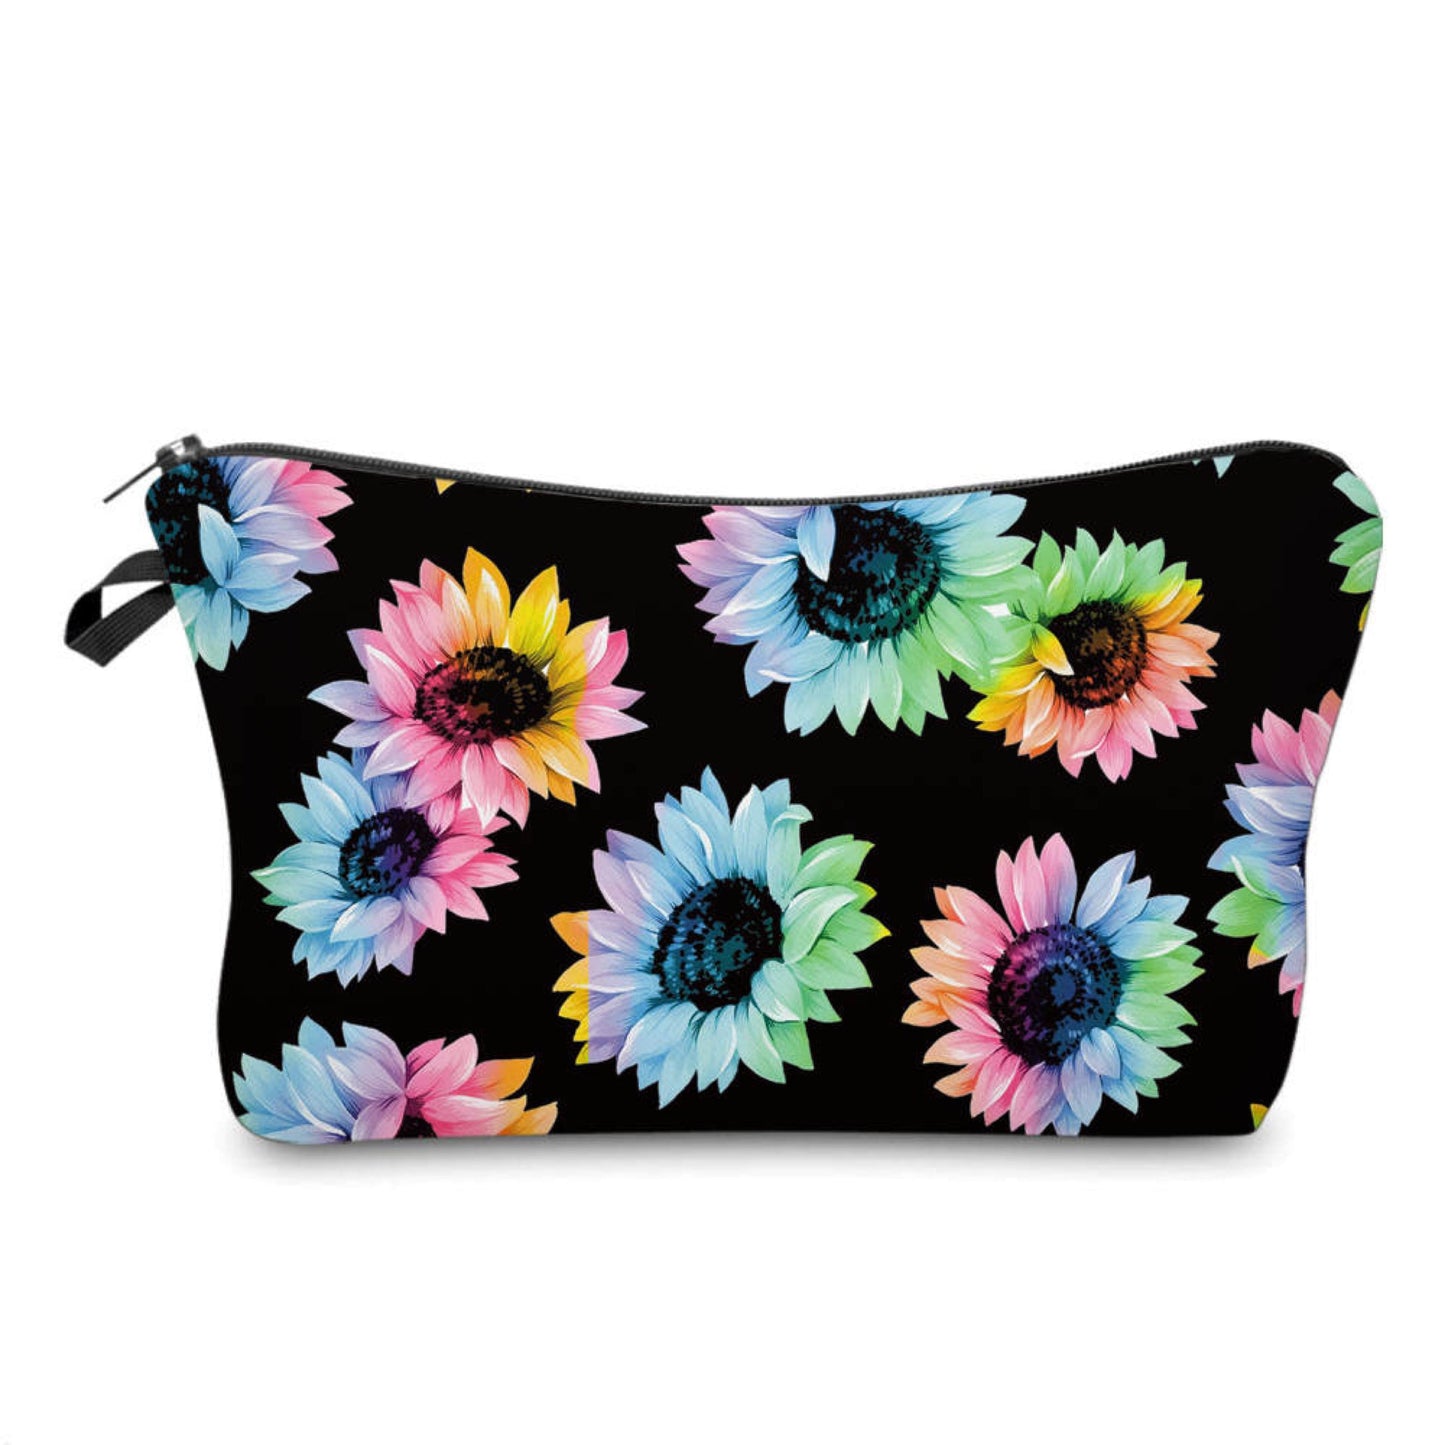 Rainbow Sunflower - Water-Resistant Multi-Use Pouch